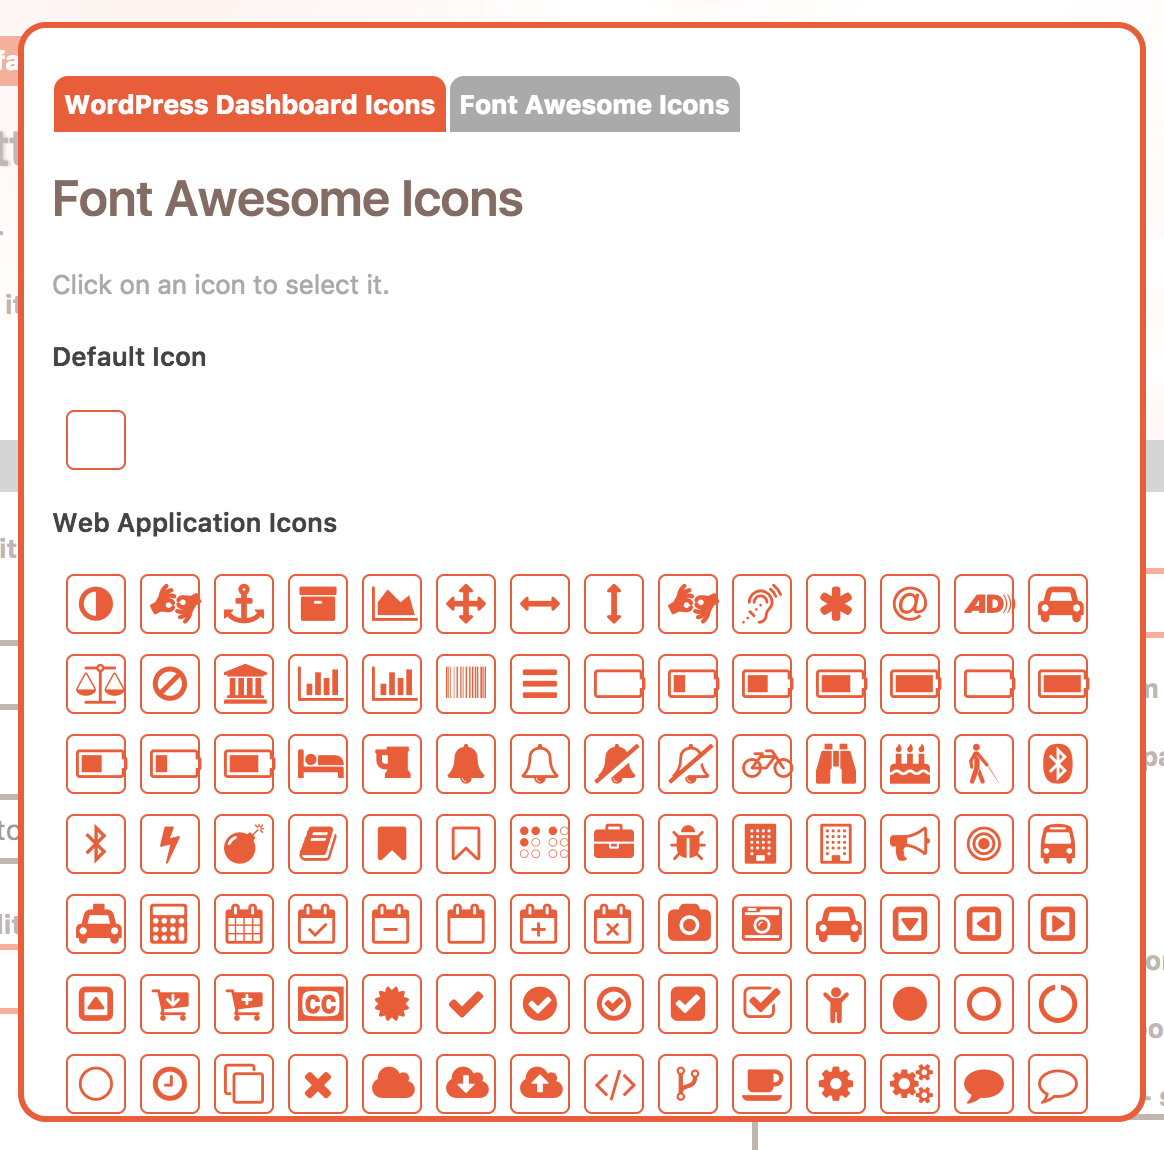 Font Awesome icons in the Cusmin icon picker